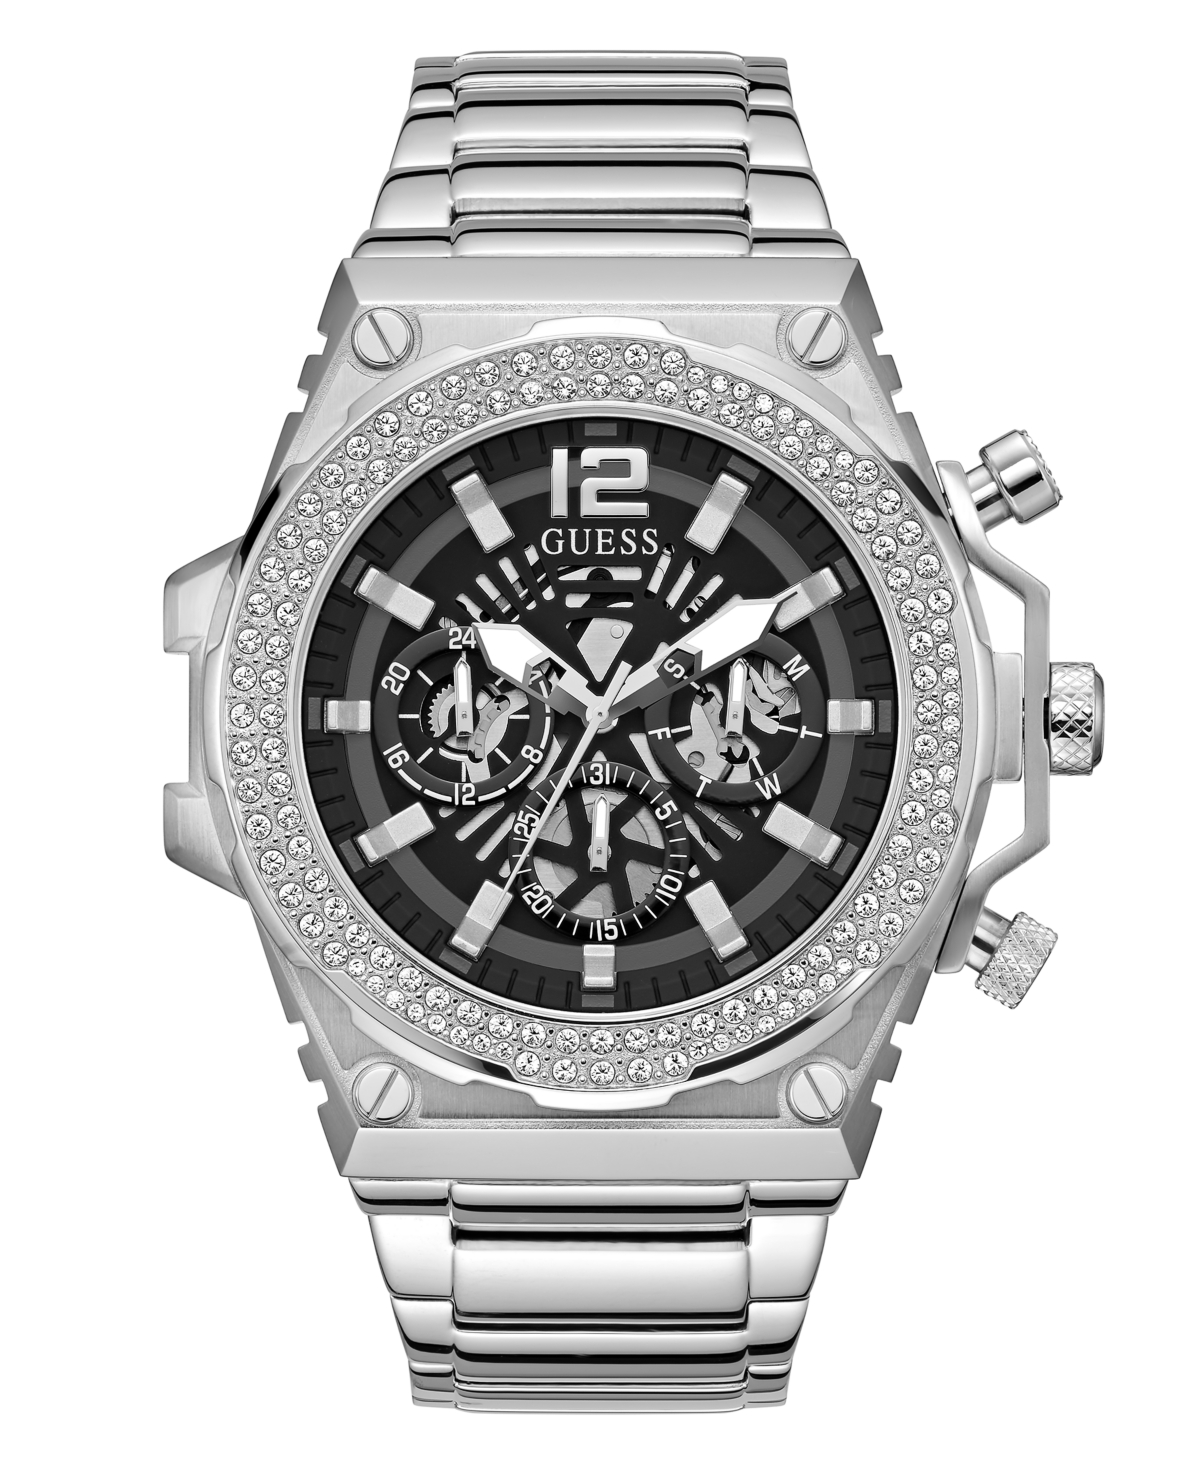 Guess Men's Multi-function Silver-tone Stainless Steel Watch 48mm In Silver Tone